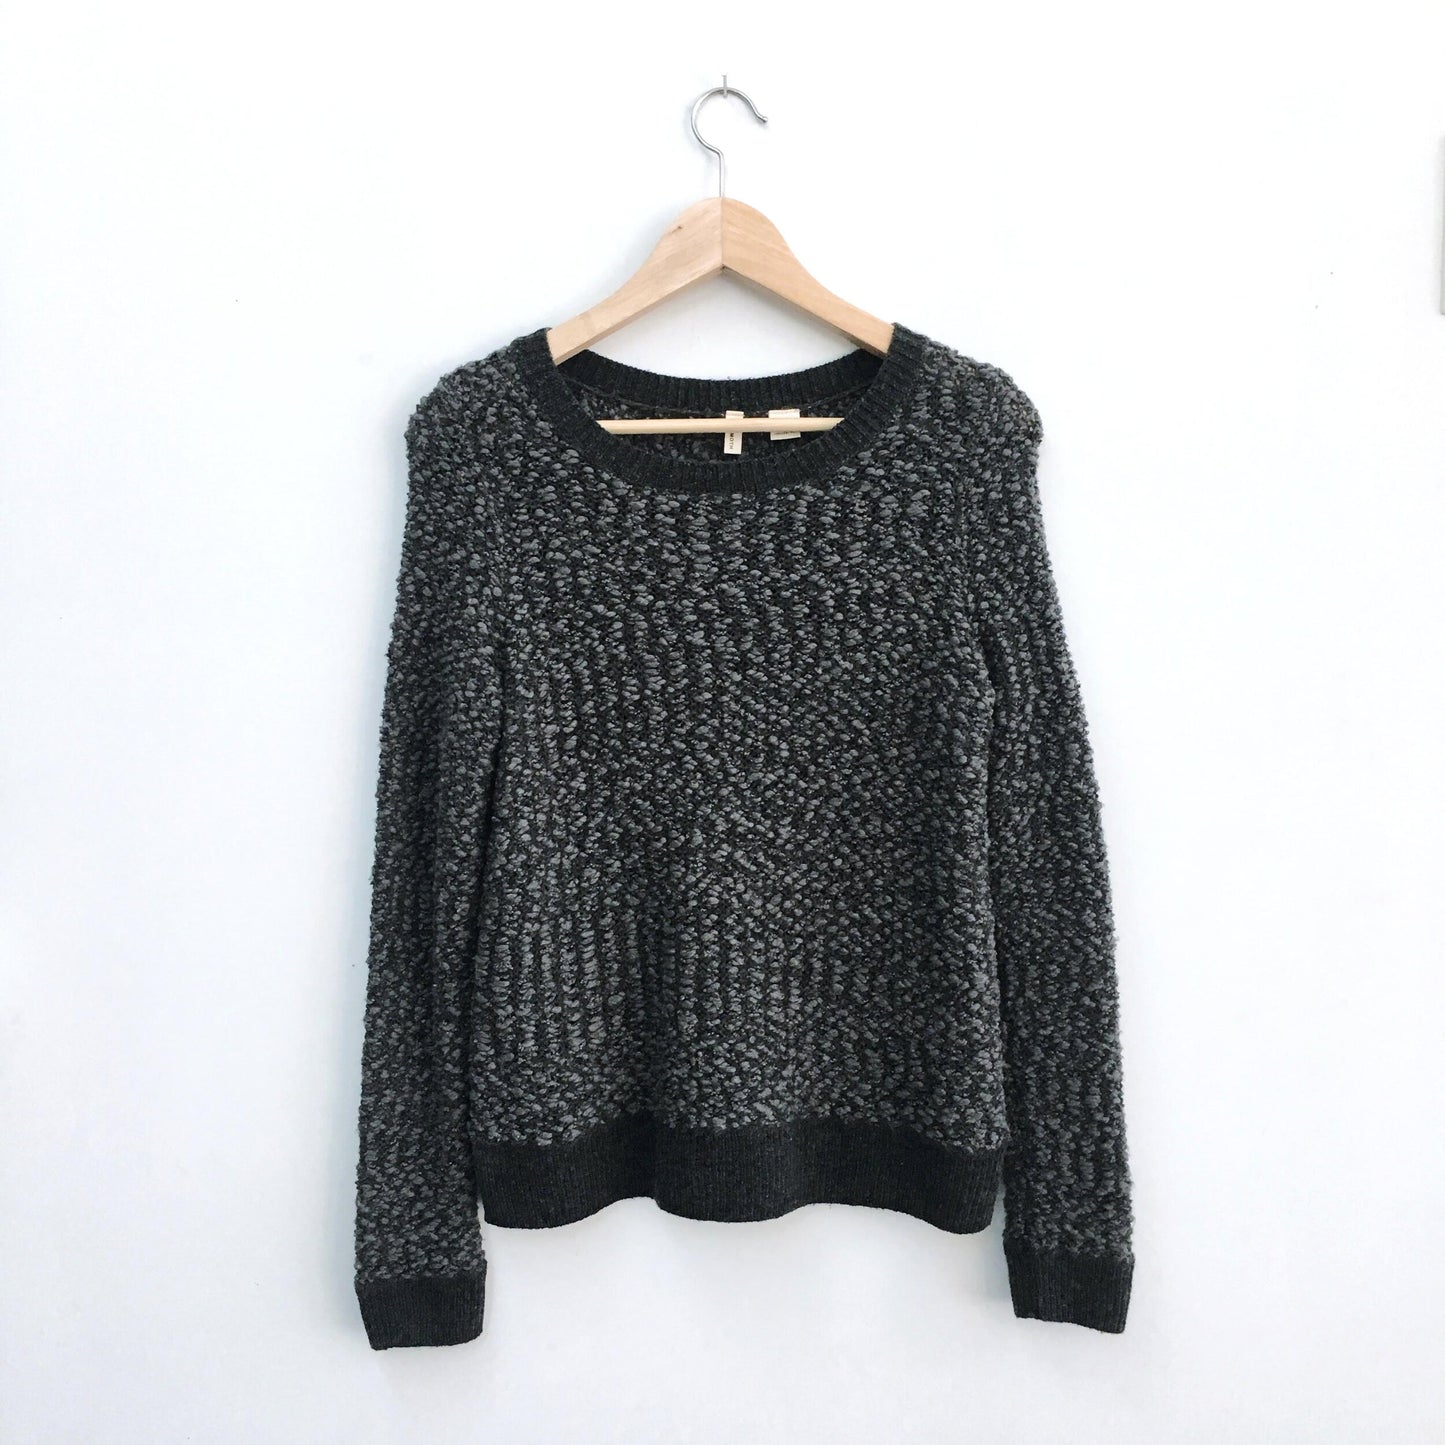 Moth cozy knit pullover - size Small